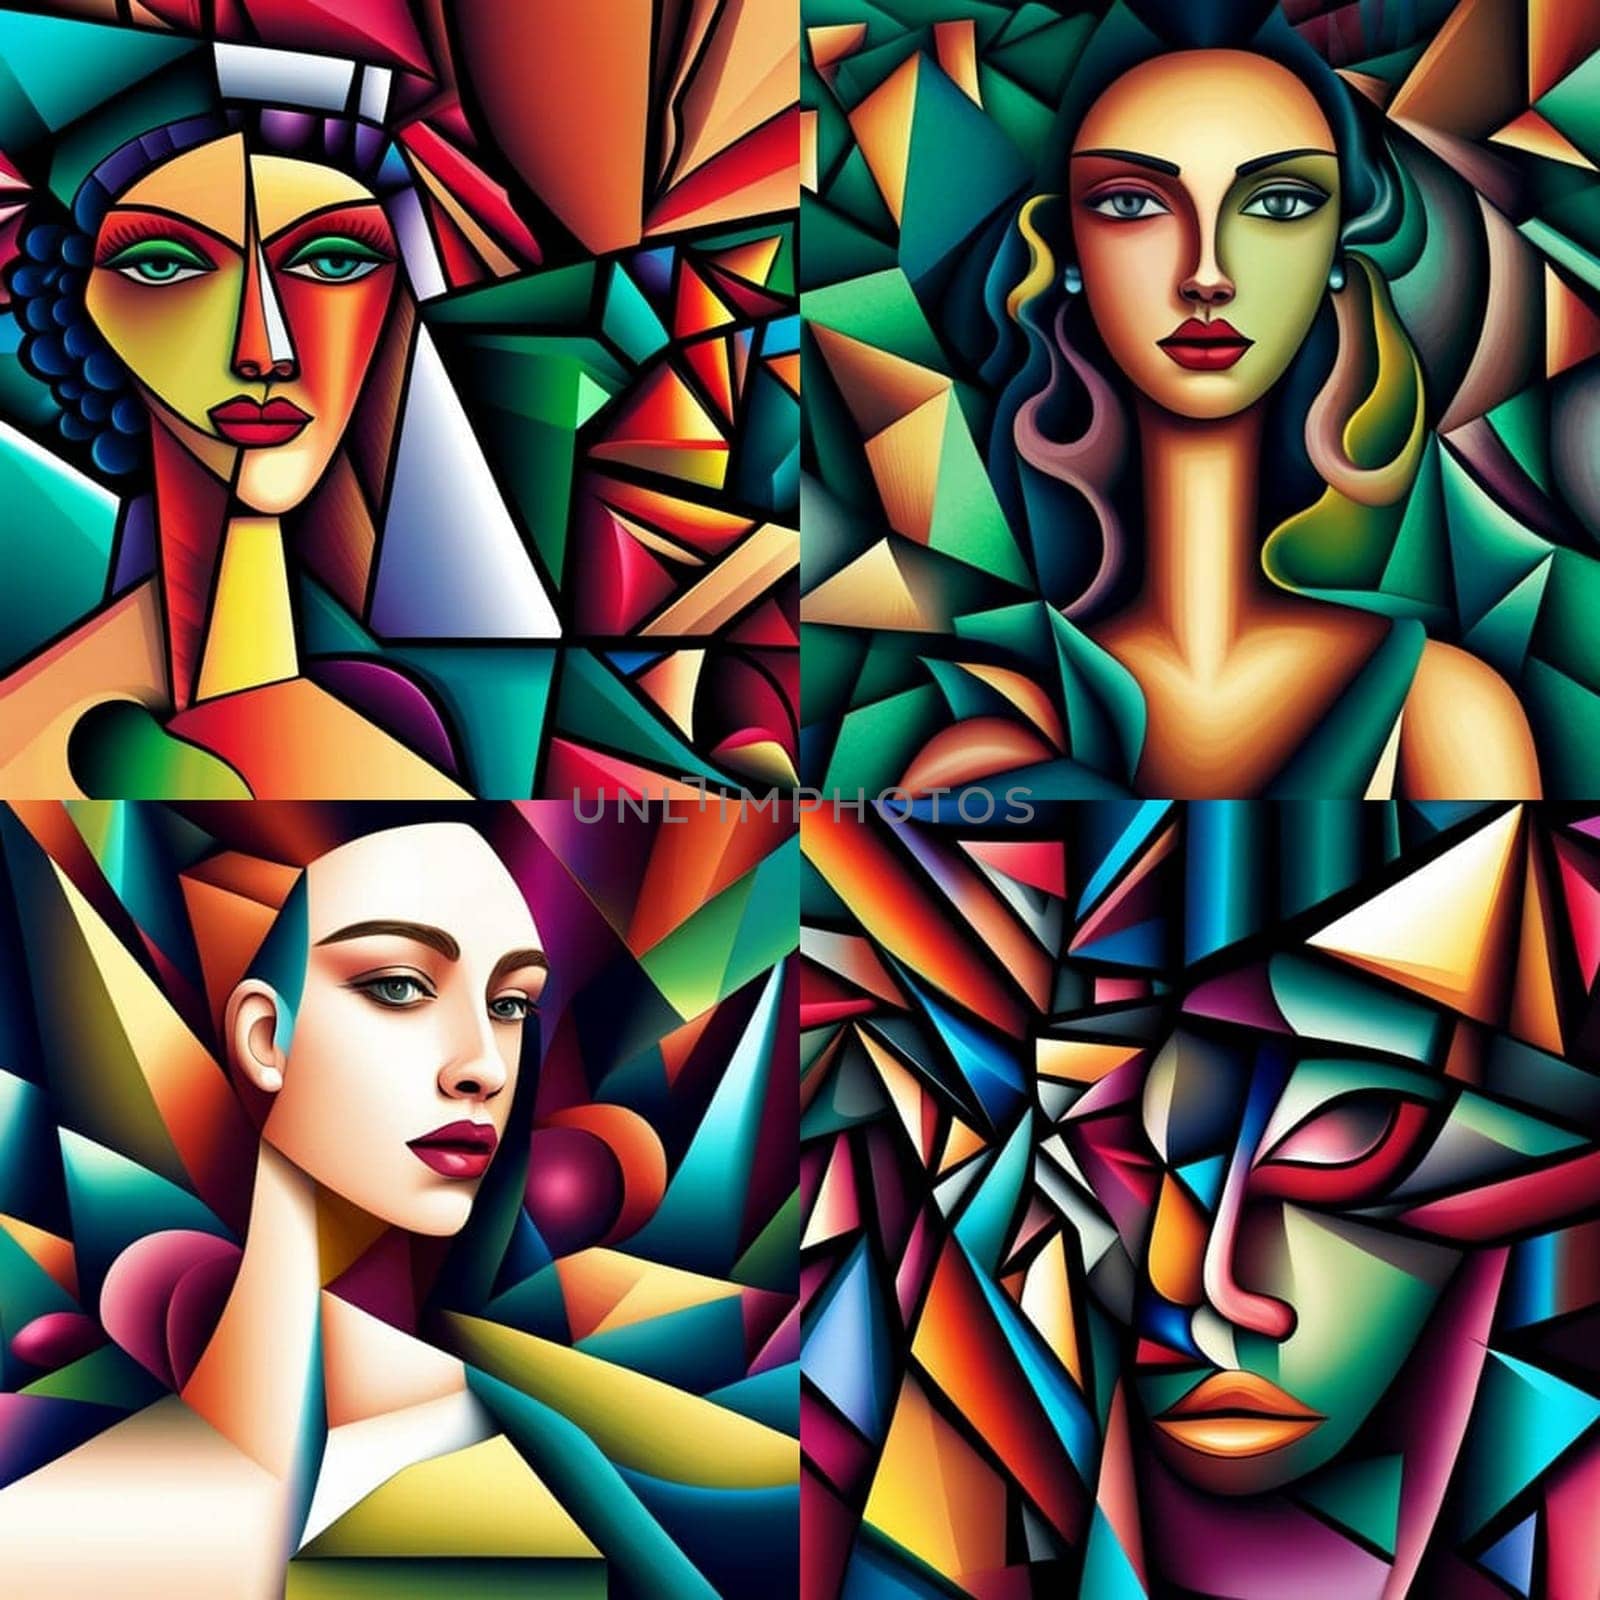 Cubist style portrait of young women. by Vailatese46